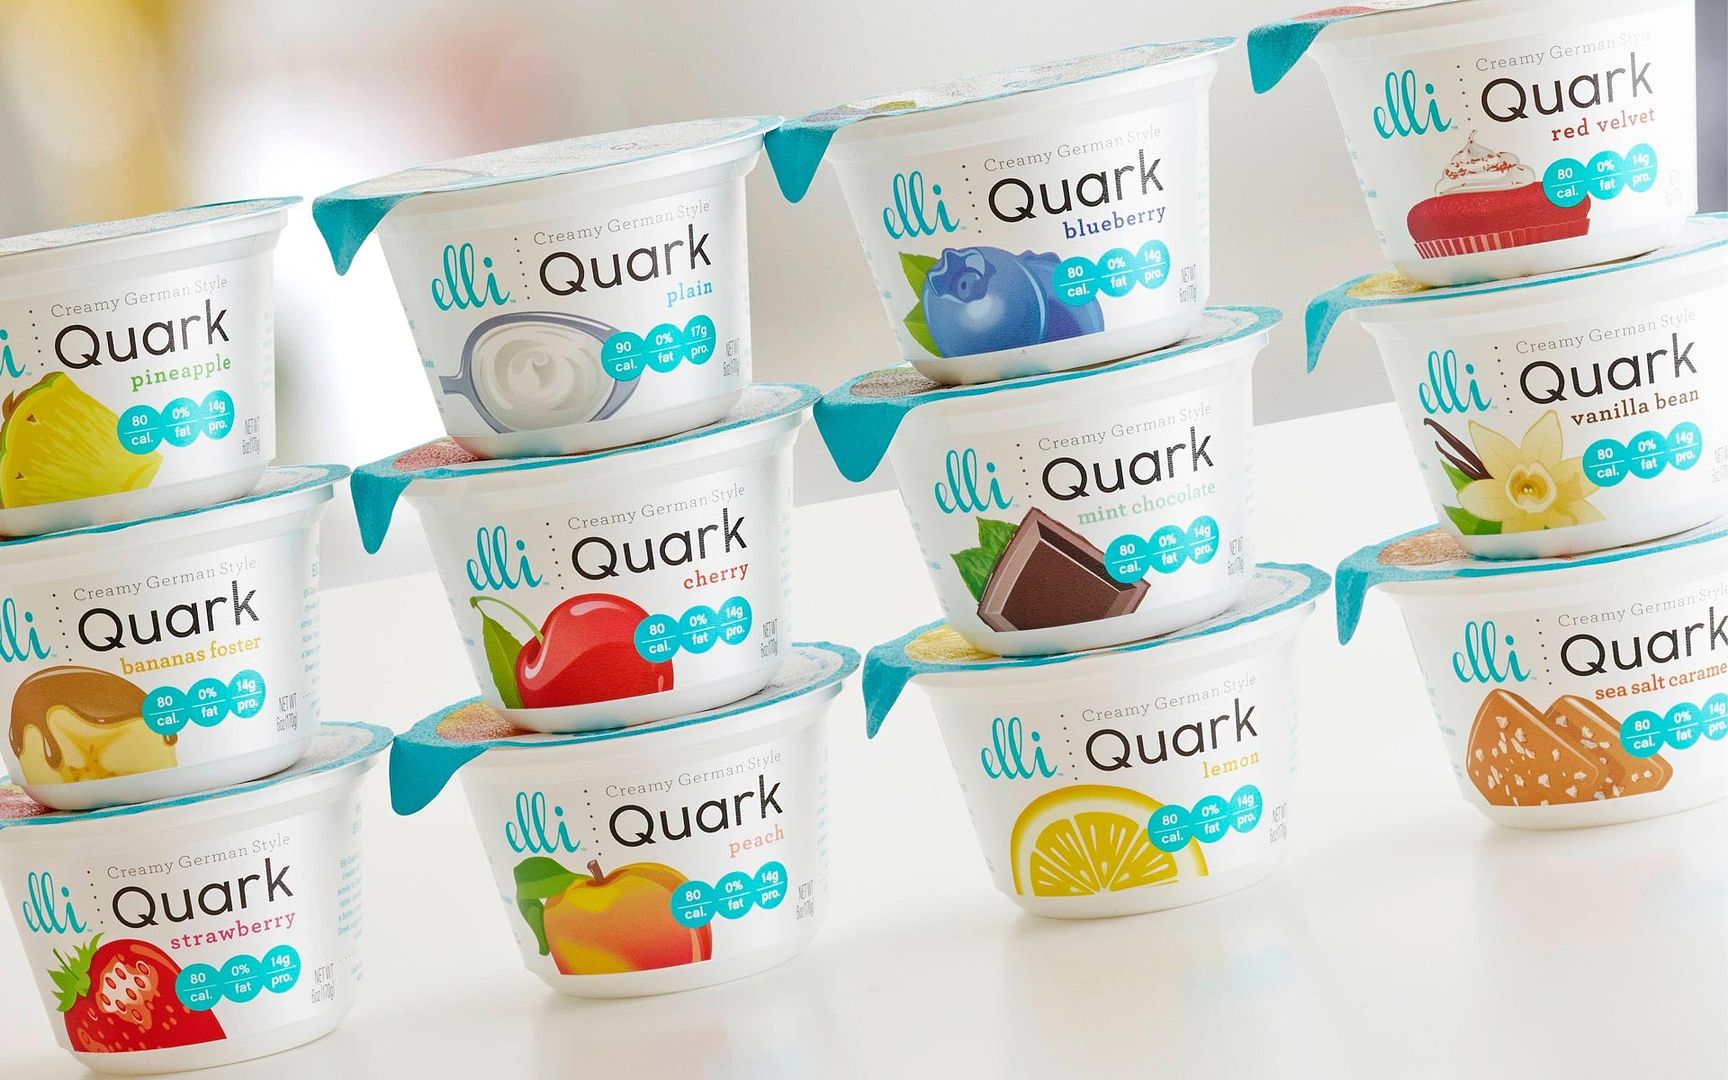 Elli Quark alternative to yogurts without added sugar. Plus, more protein and no artificial colors/flavors/GMOs